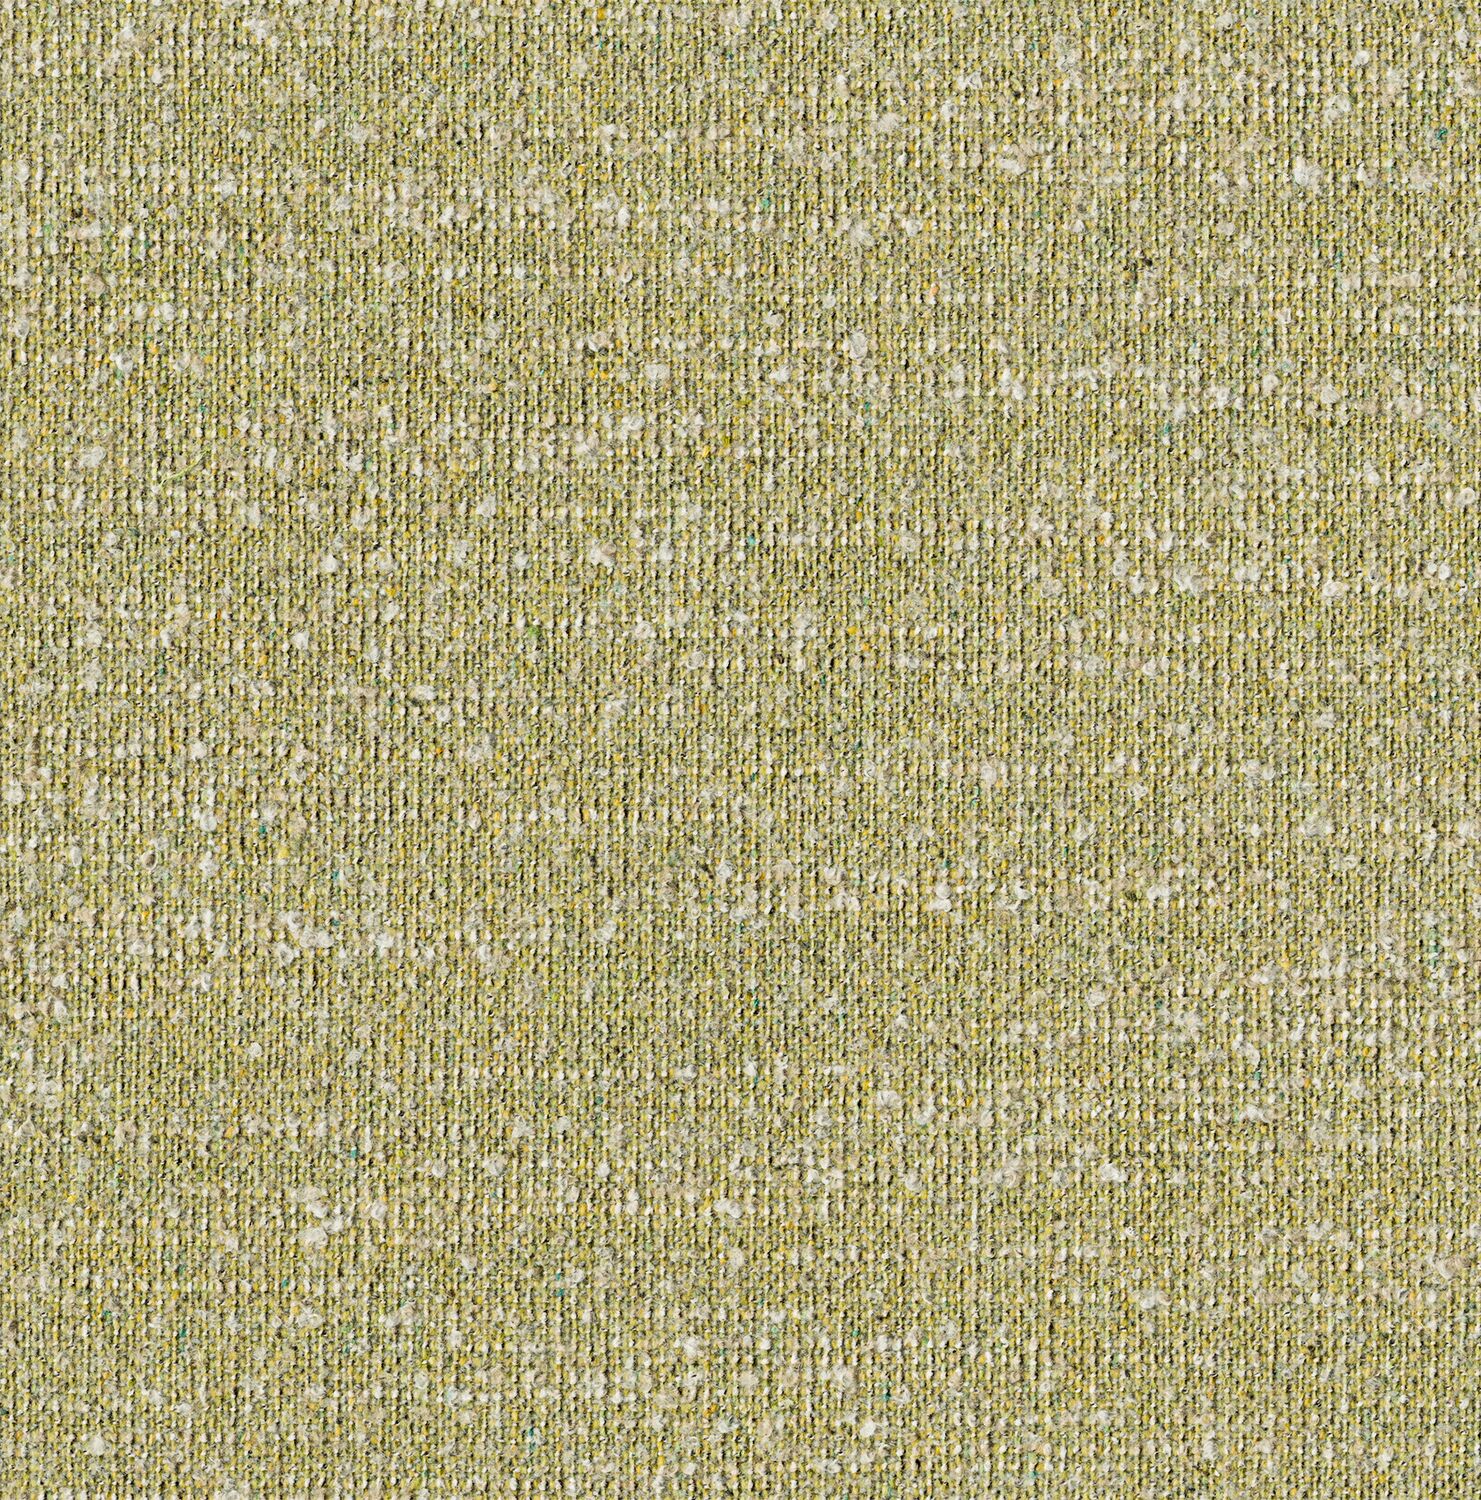 Everyday Boucle - Thicket - 4111 - 09 Tileable Swatches